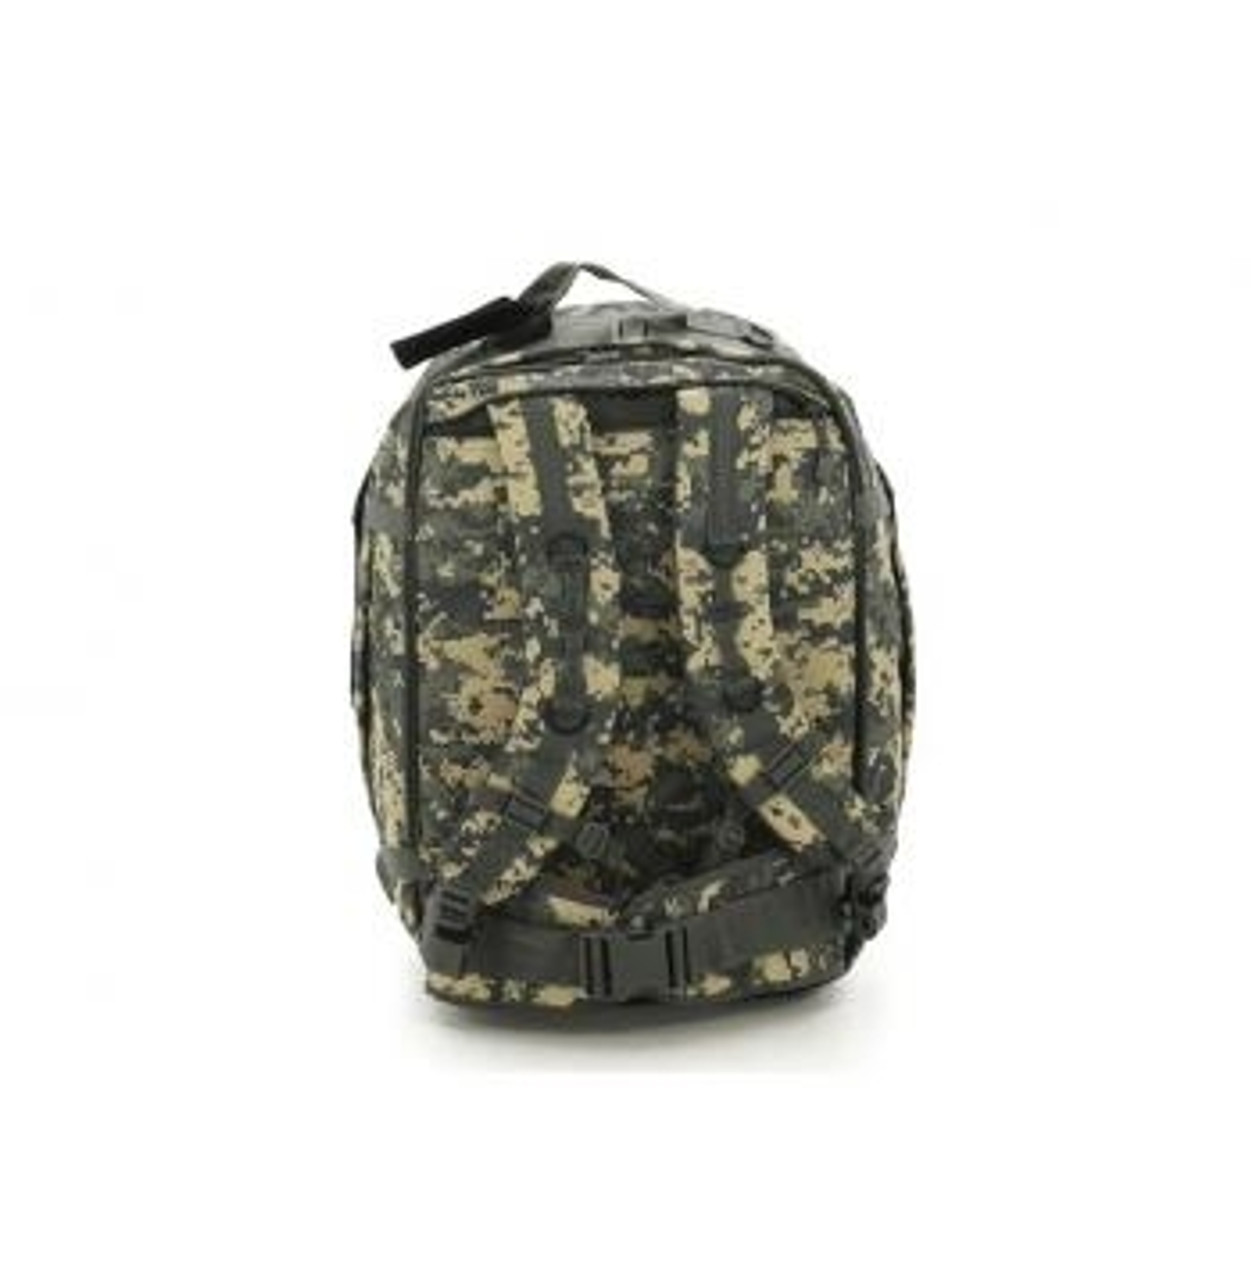 Tactical Backpack from Hessen Antique